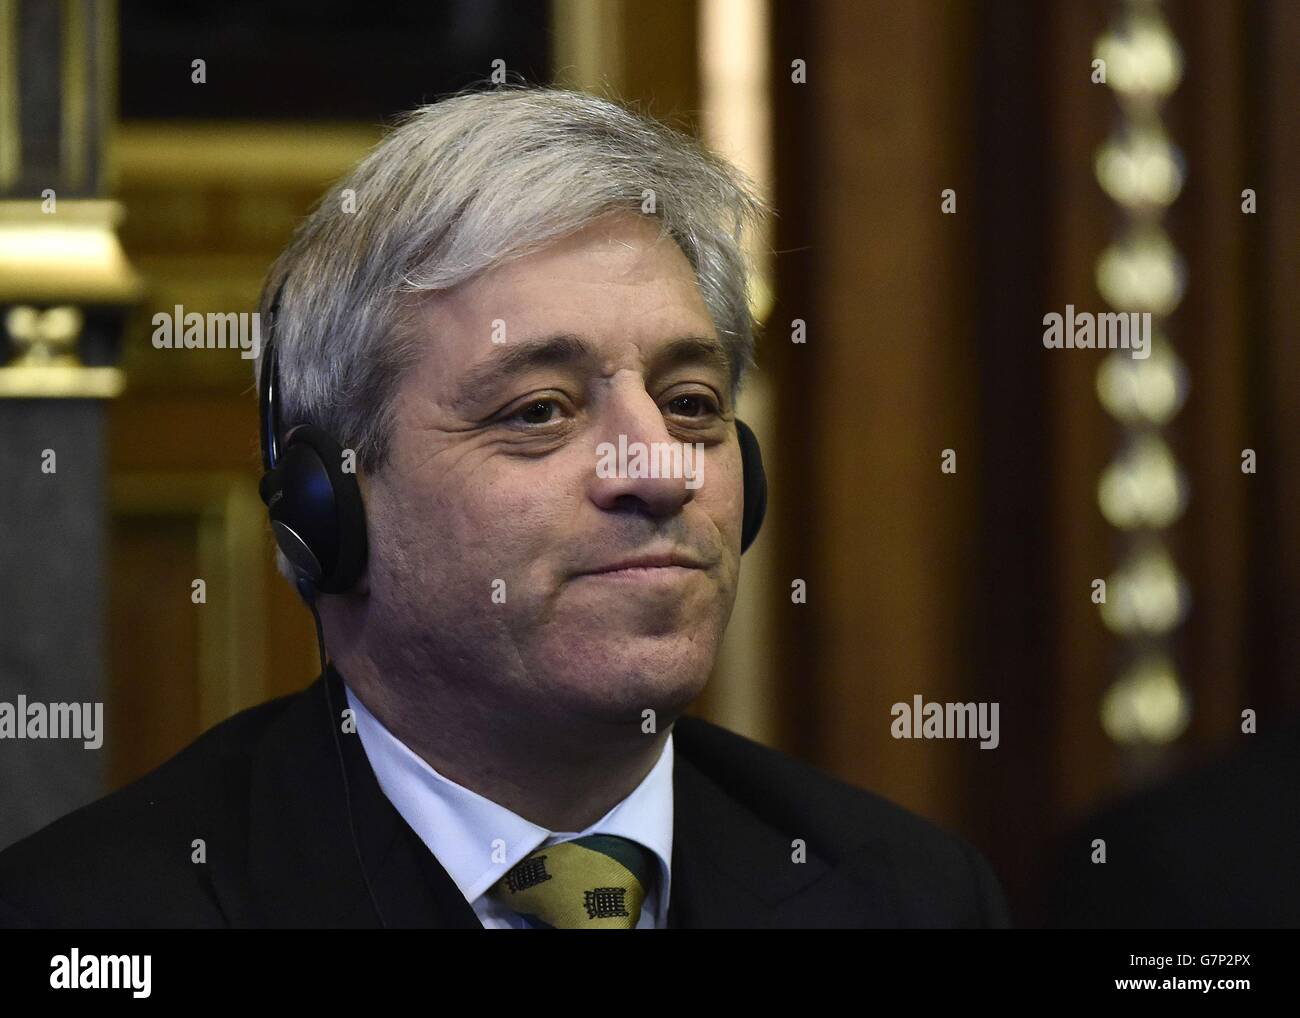 John Bercow, the Speaker of the House of Commons listens as Mexico's  President Enrique Pena Nieto delivers an address to members of the British  All-Party Parliamentary Group at the Houses of Parliament